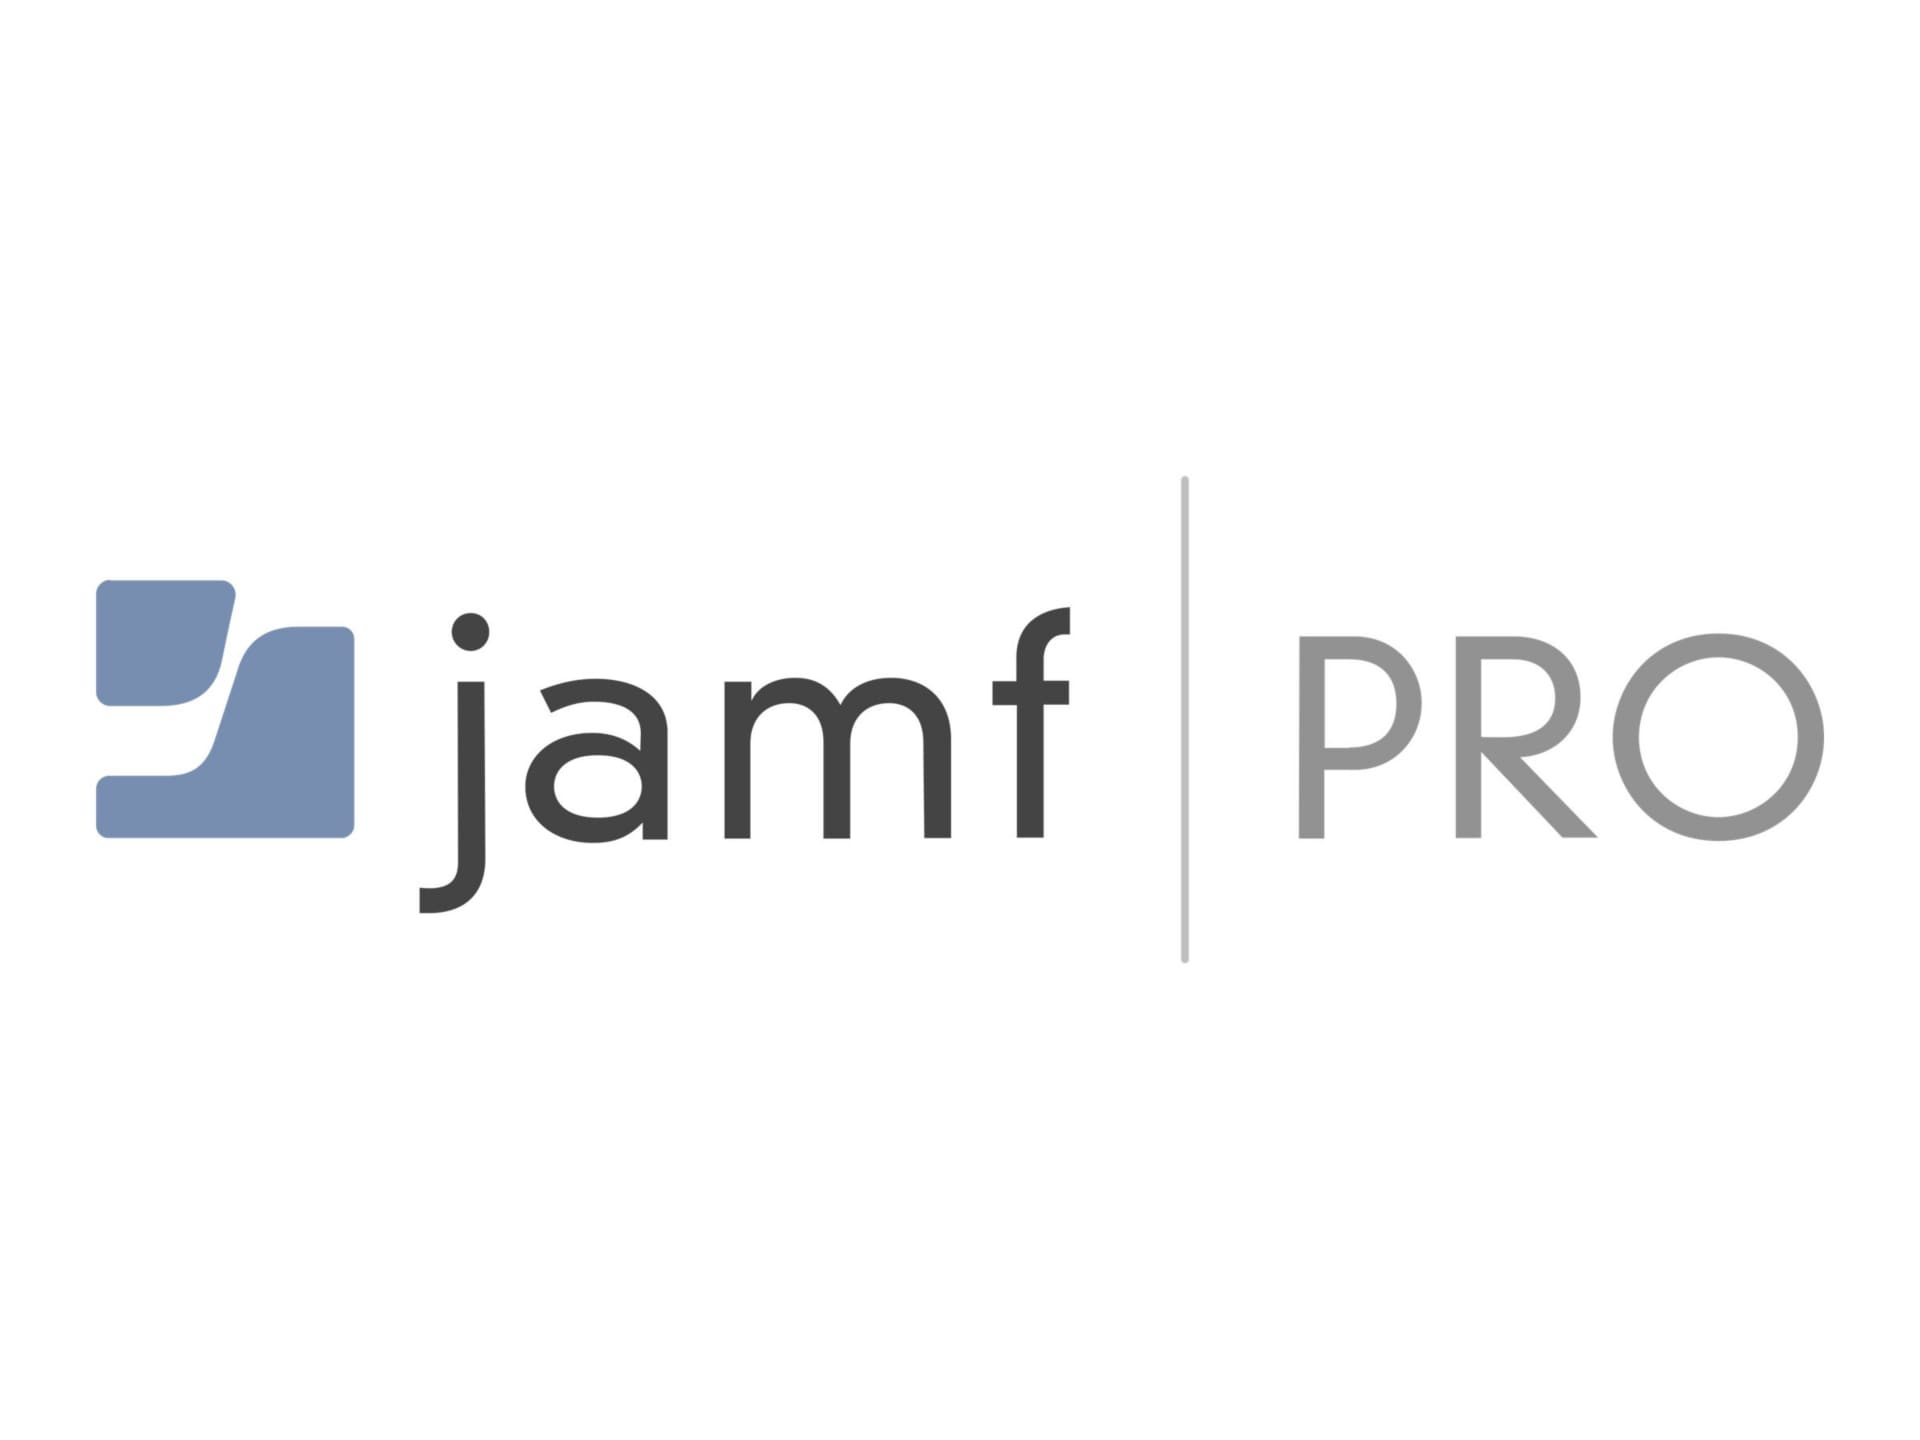 JAMF PRO for tvOS - On-Premise Term License renewal (annual) - 1 device